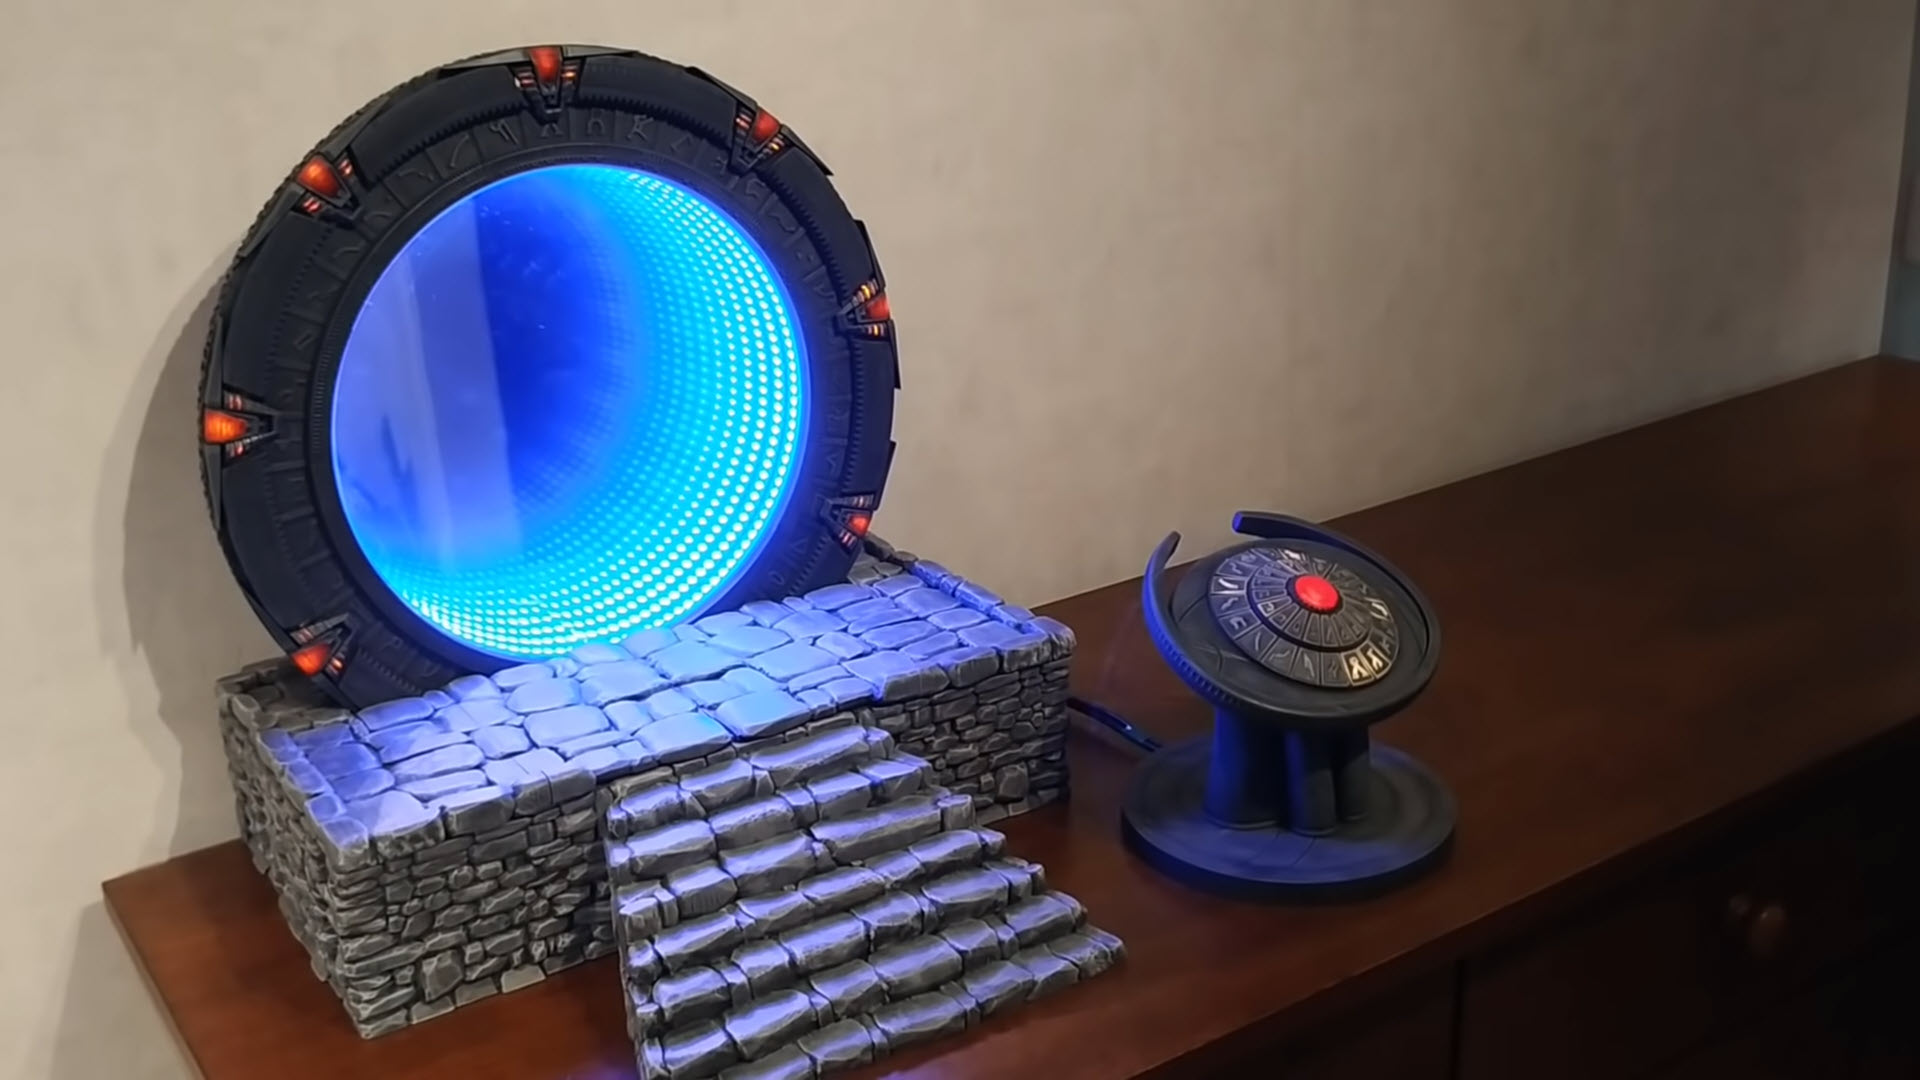 Test Out This Raspberry Pi-Powered Stargate with Working Lights and Sounds